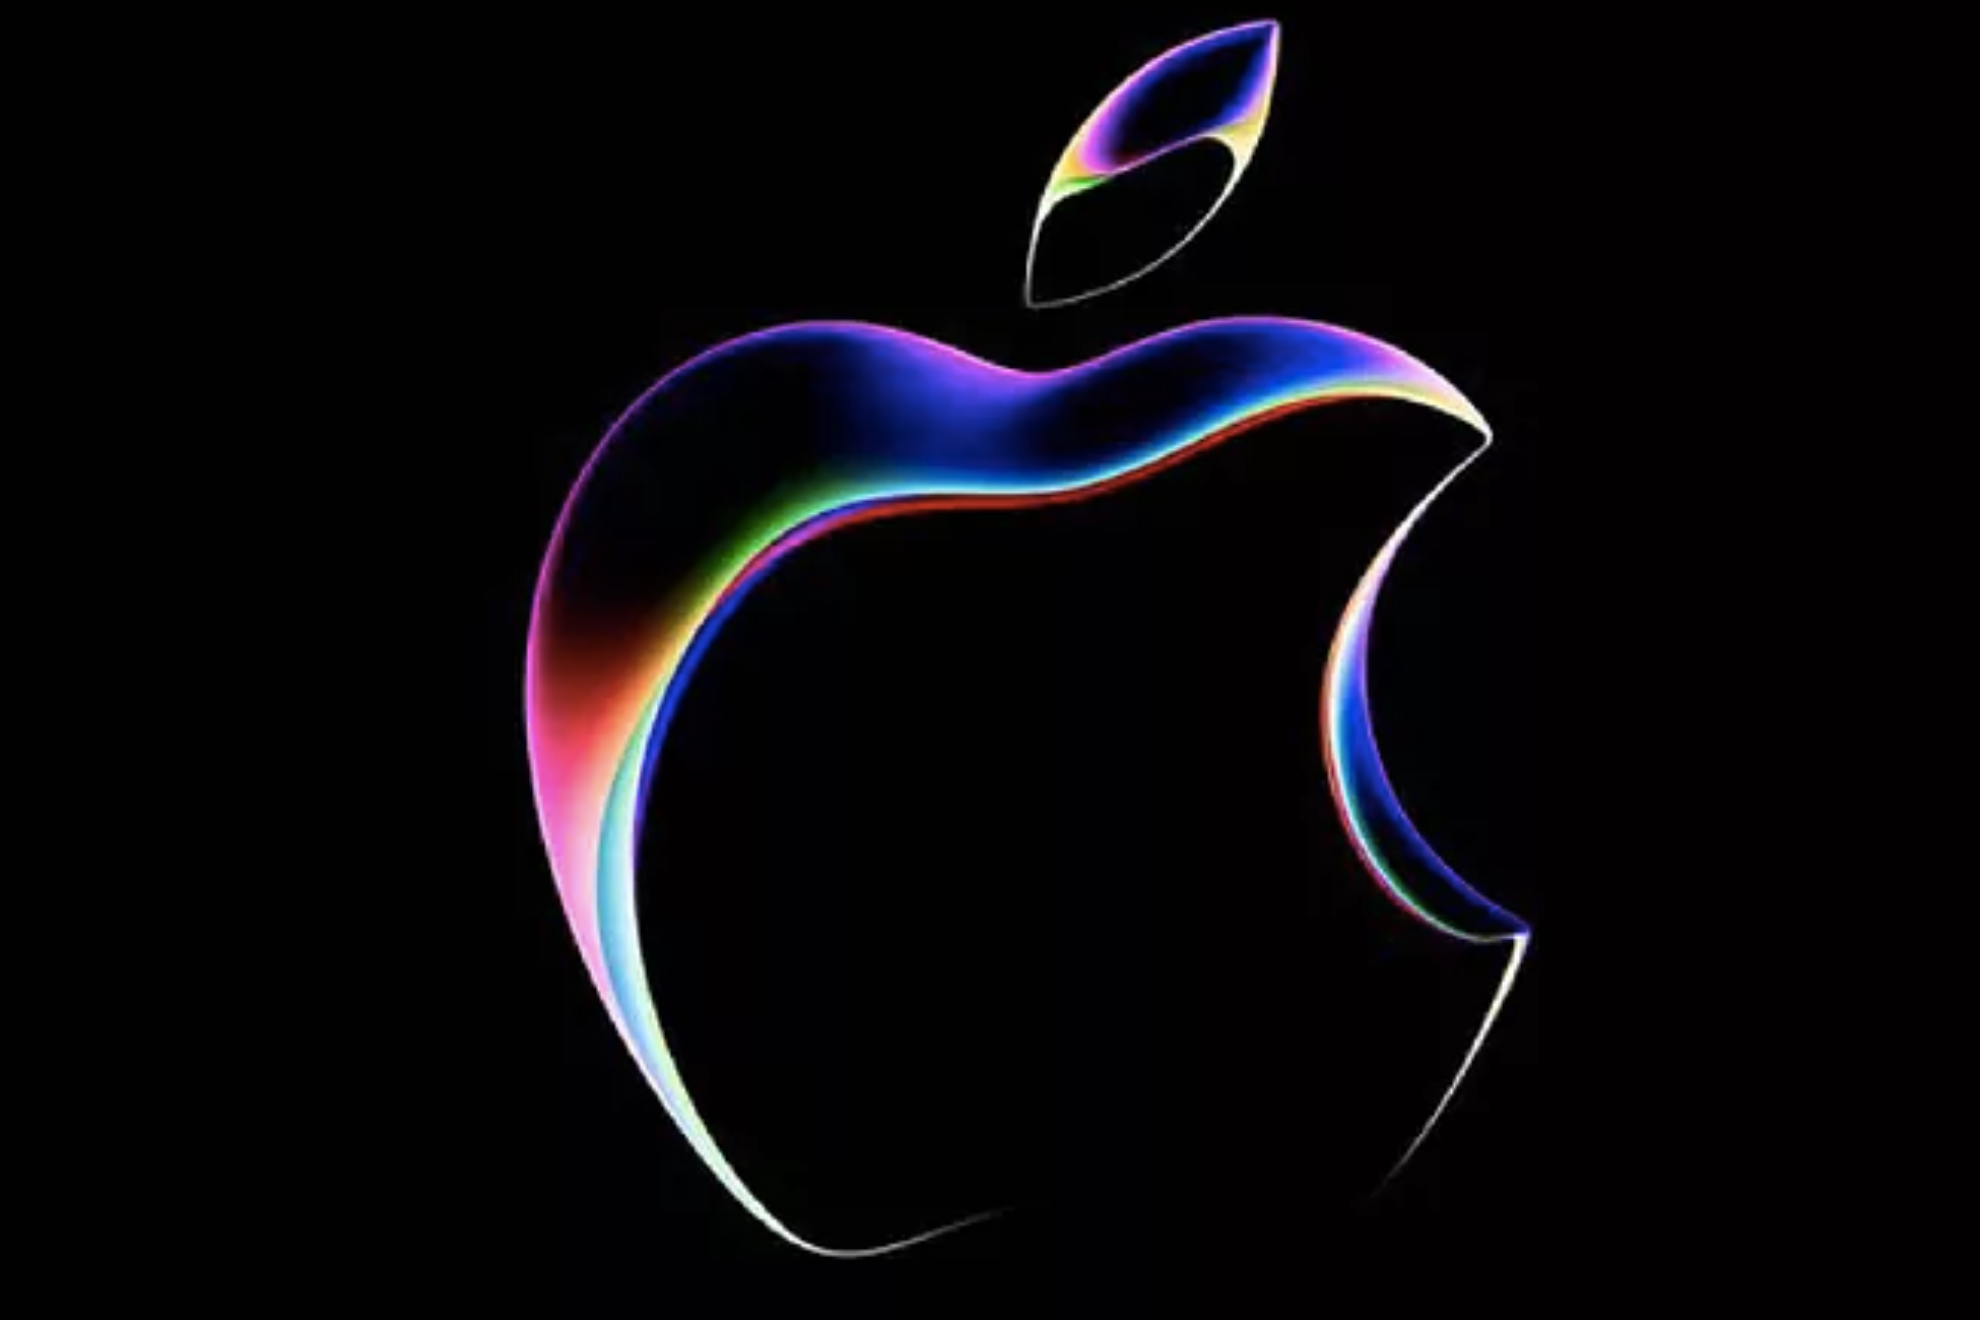 What to expect from Apple event 2023?